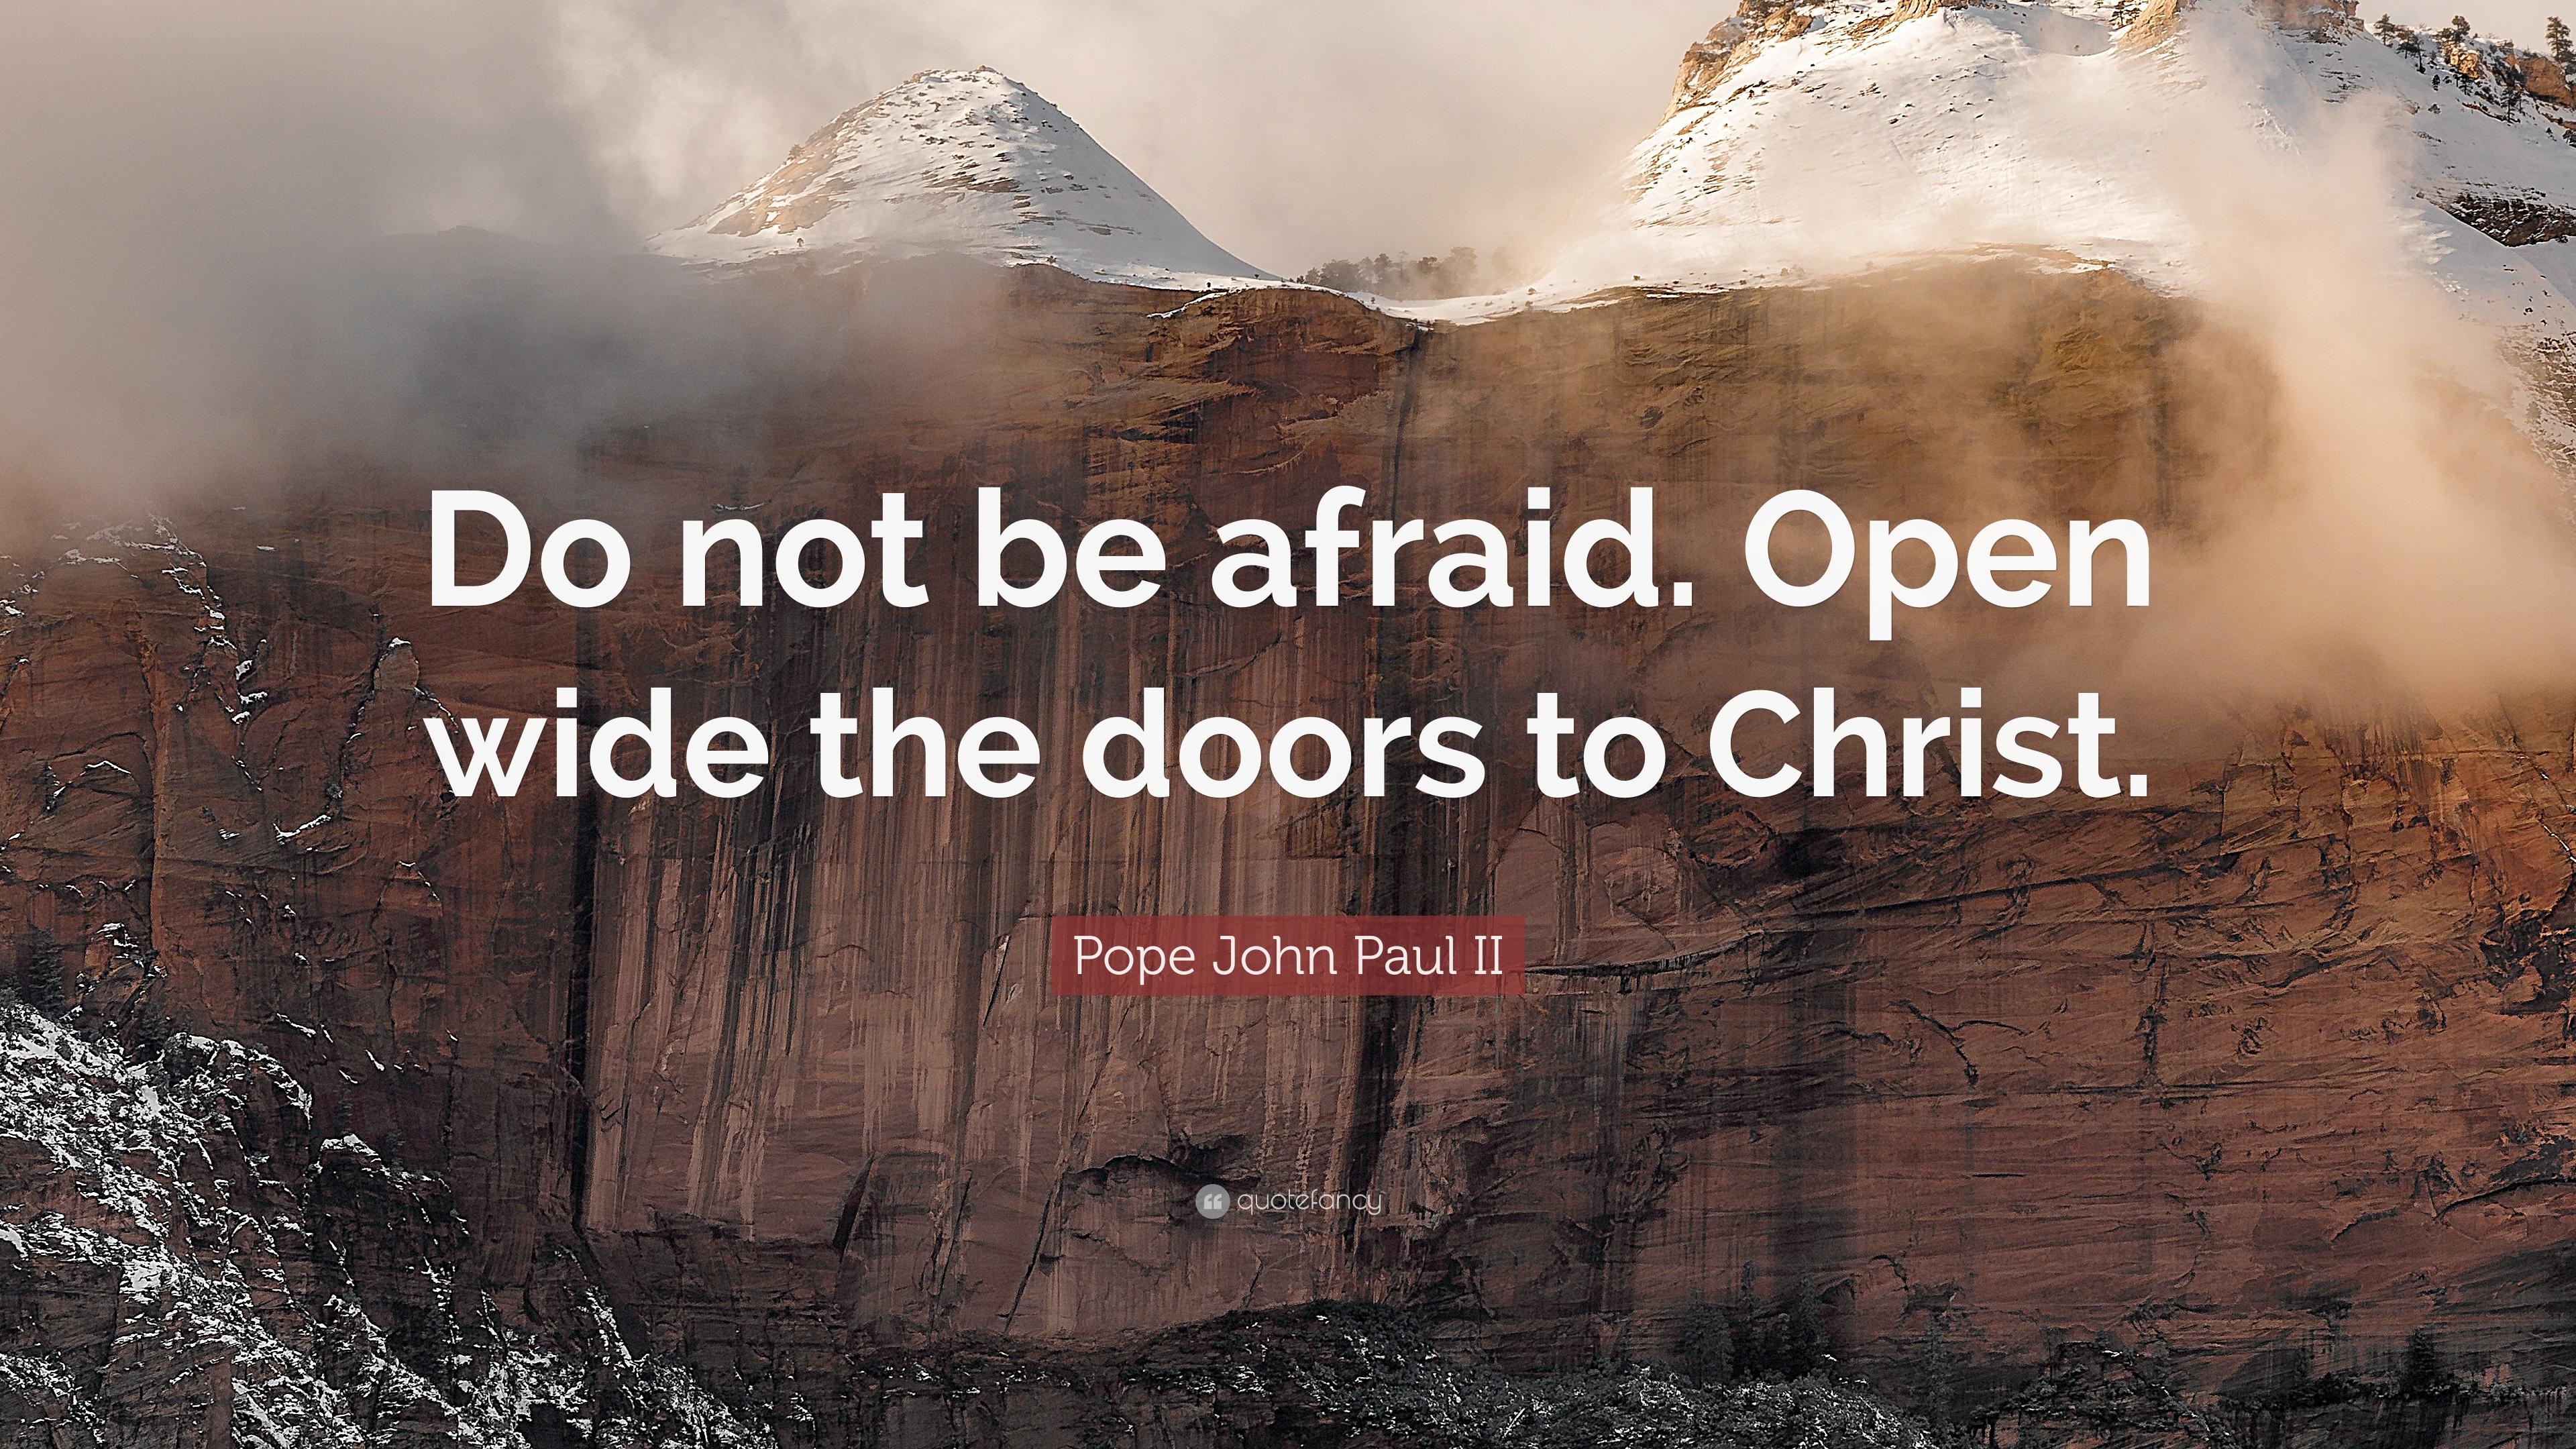 Pope John Paul II Quote: “Do not be afraid. Open wide the doors to